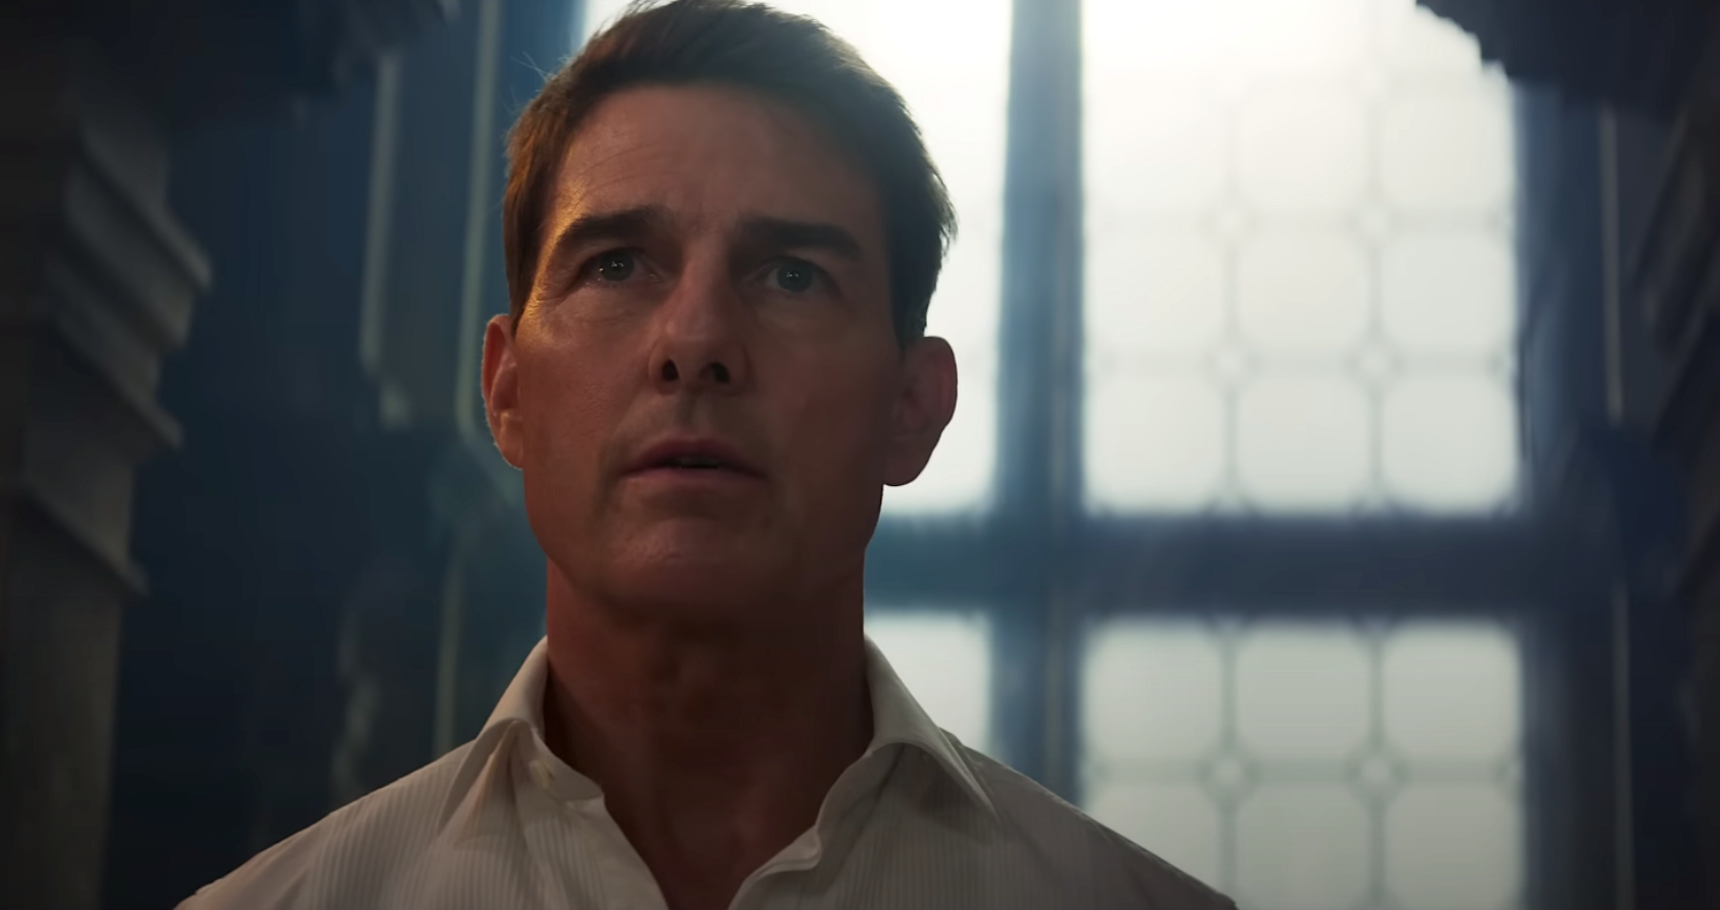 Tom Cruise excels as America’s final movie star in the latest ‘Mission: Impossible’.